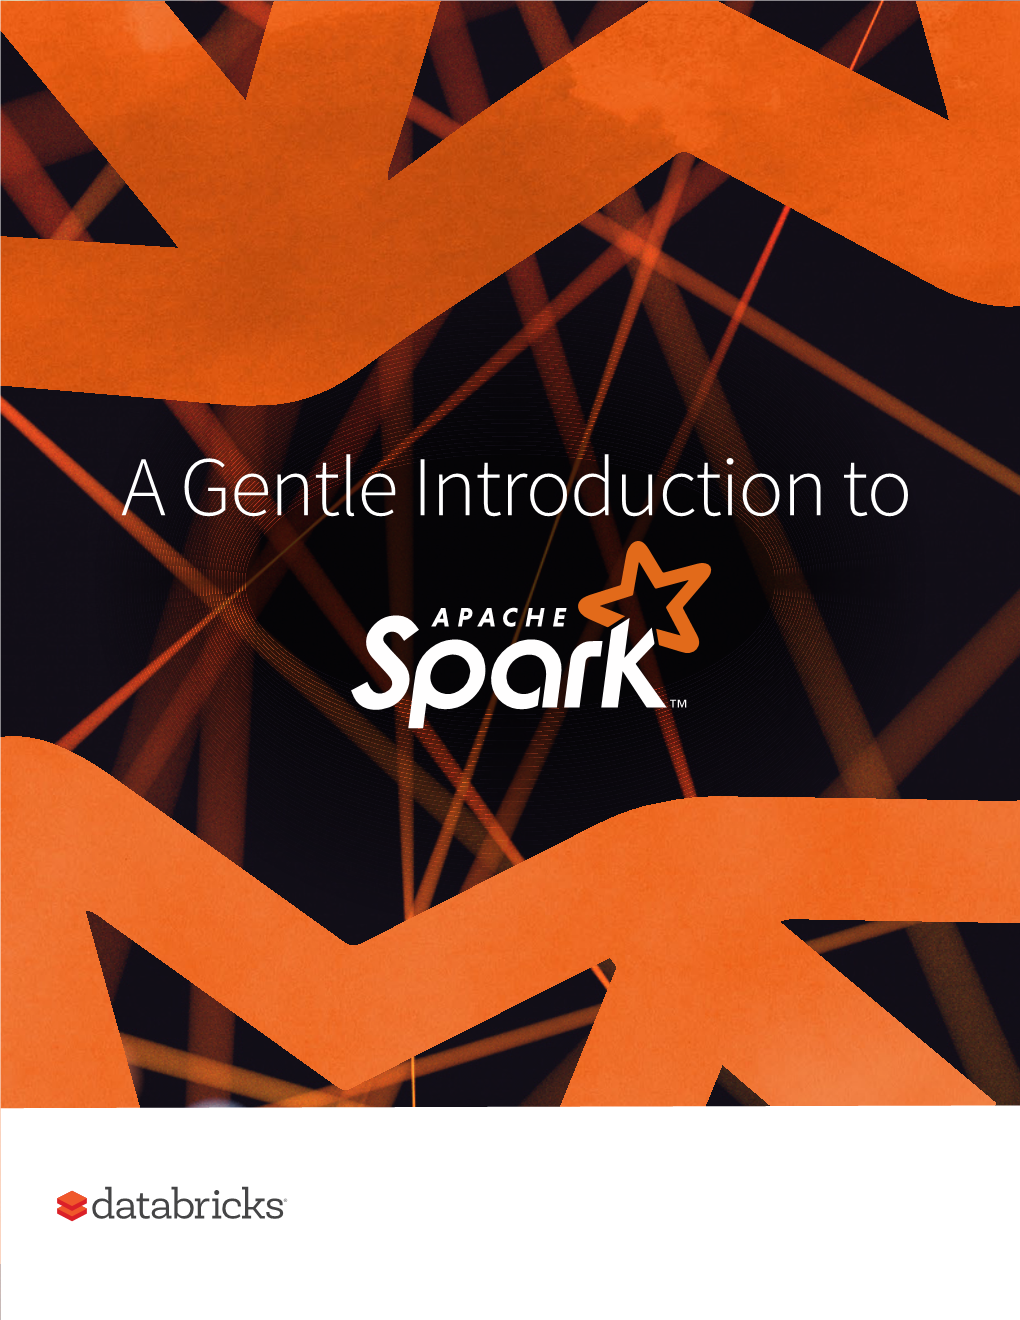 A Gentle Introduction to Spark